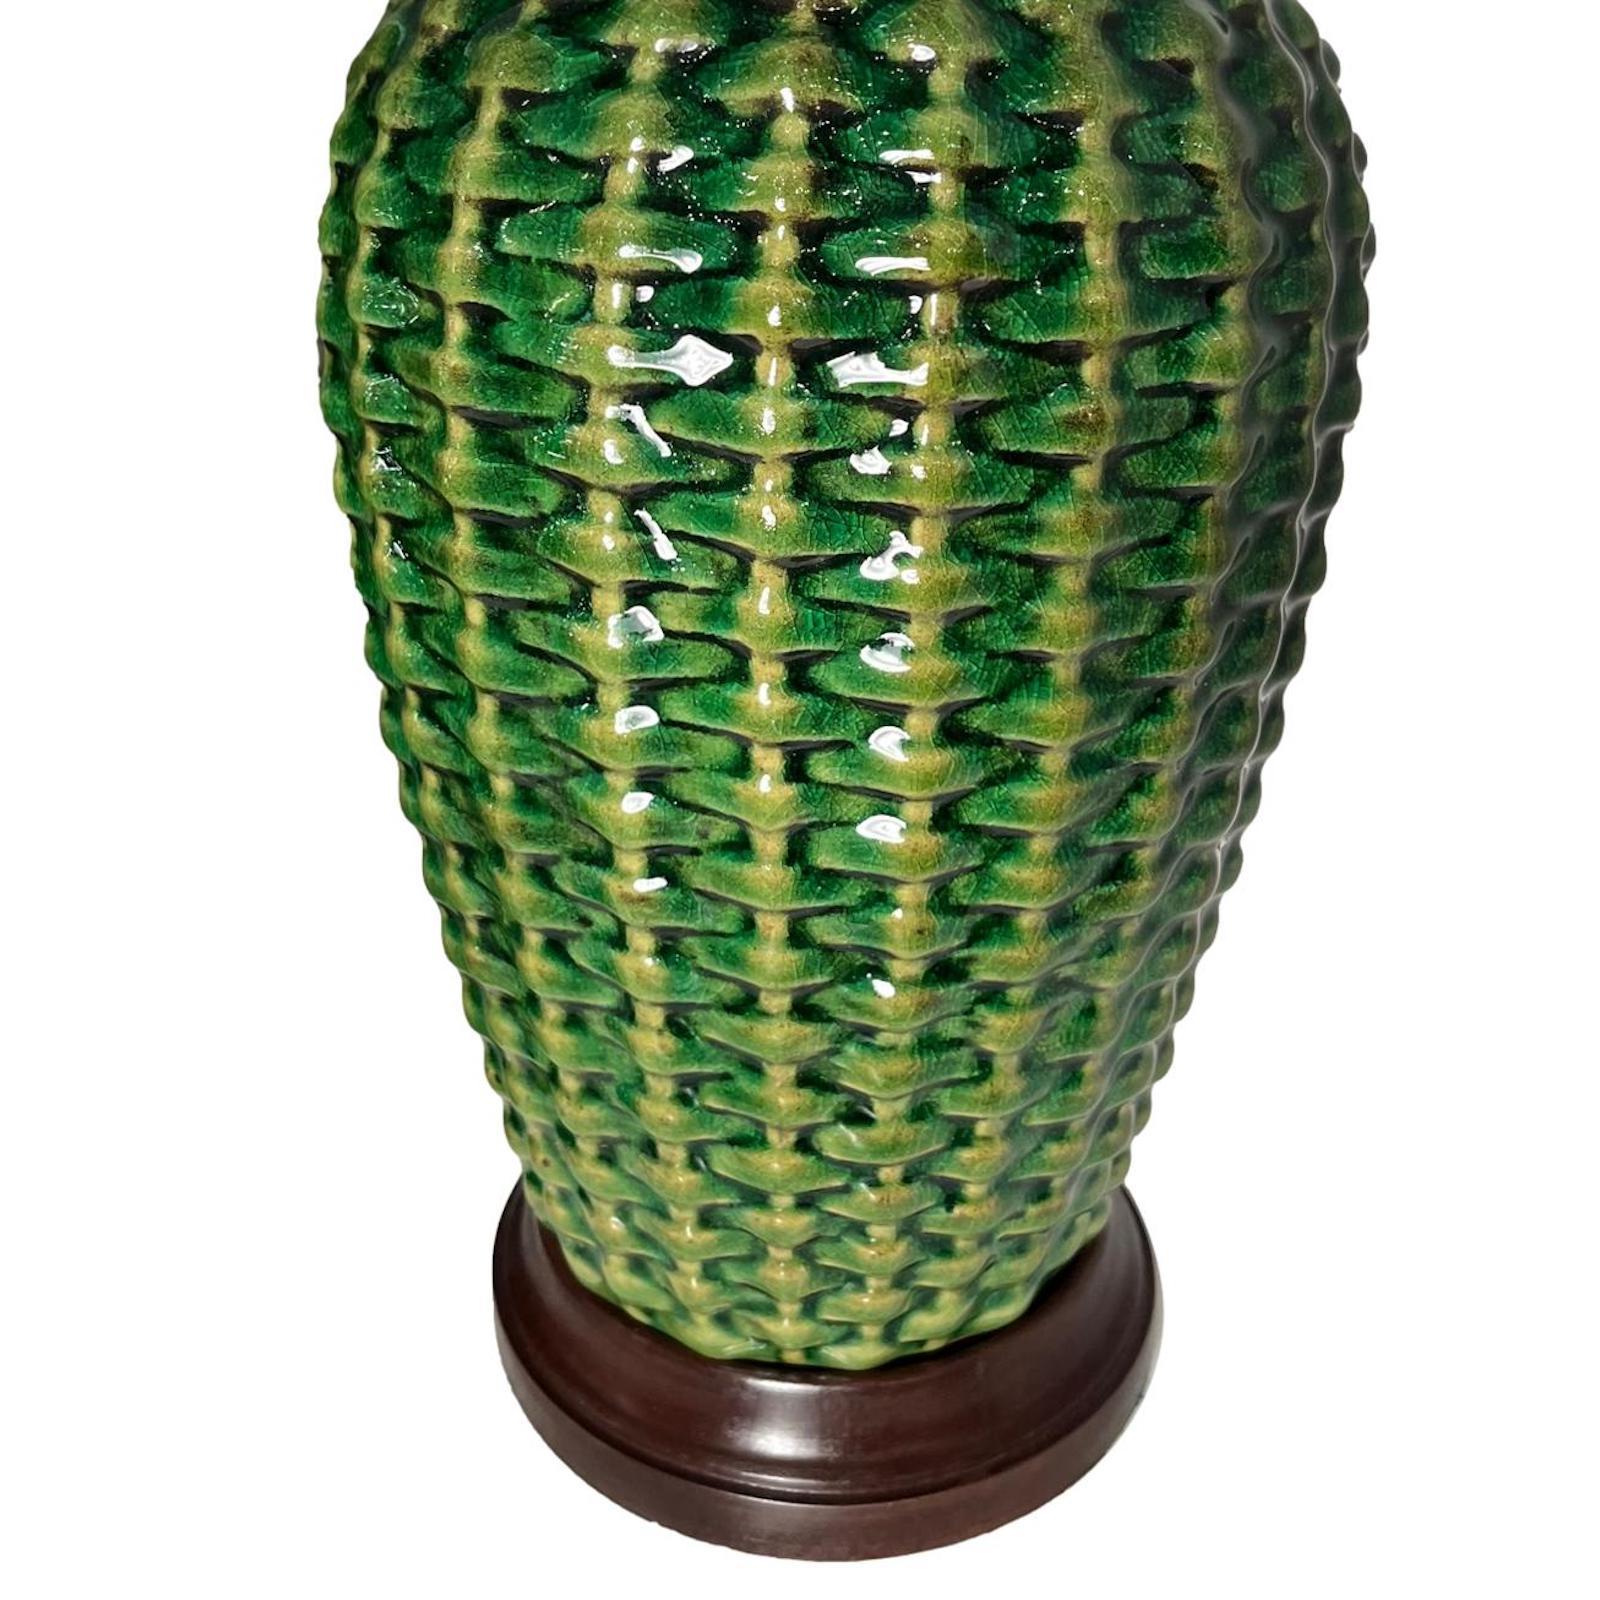 Pair of circa 1950s Italian porcelain lamps in a woven pattern.

Measurements:
Height of body: 19